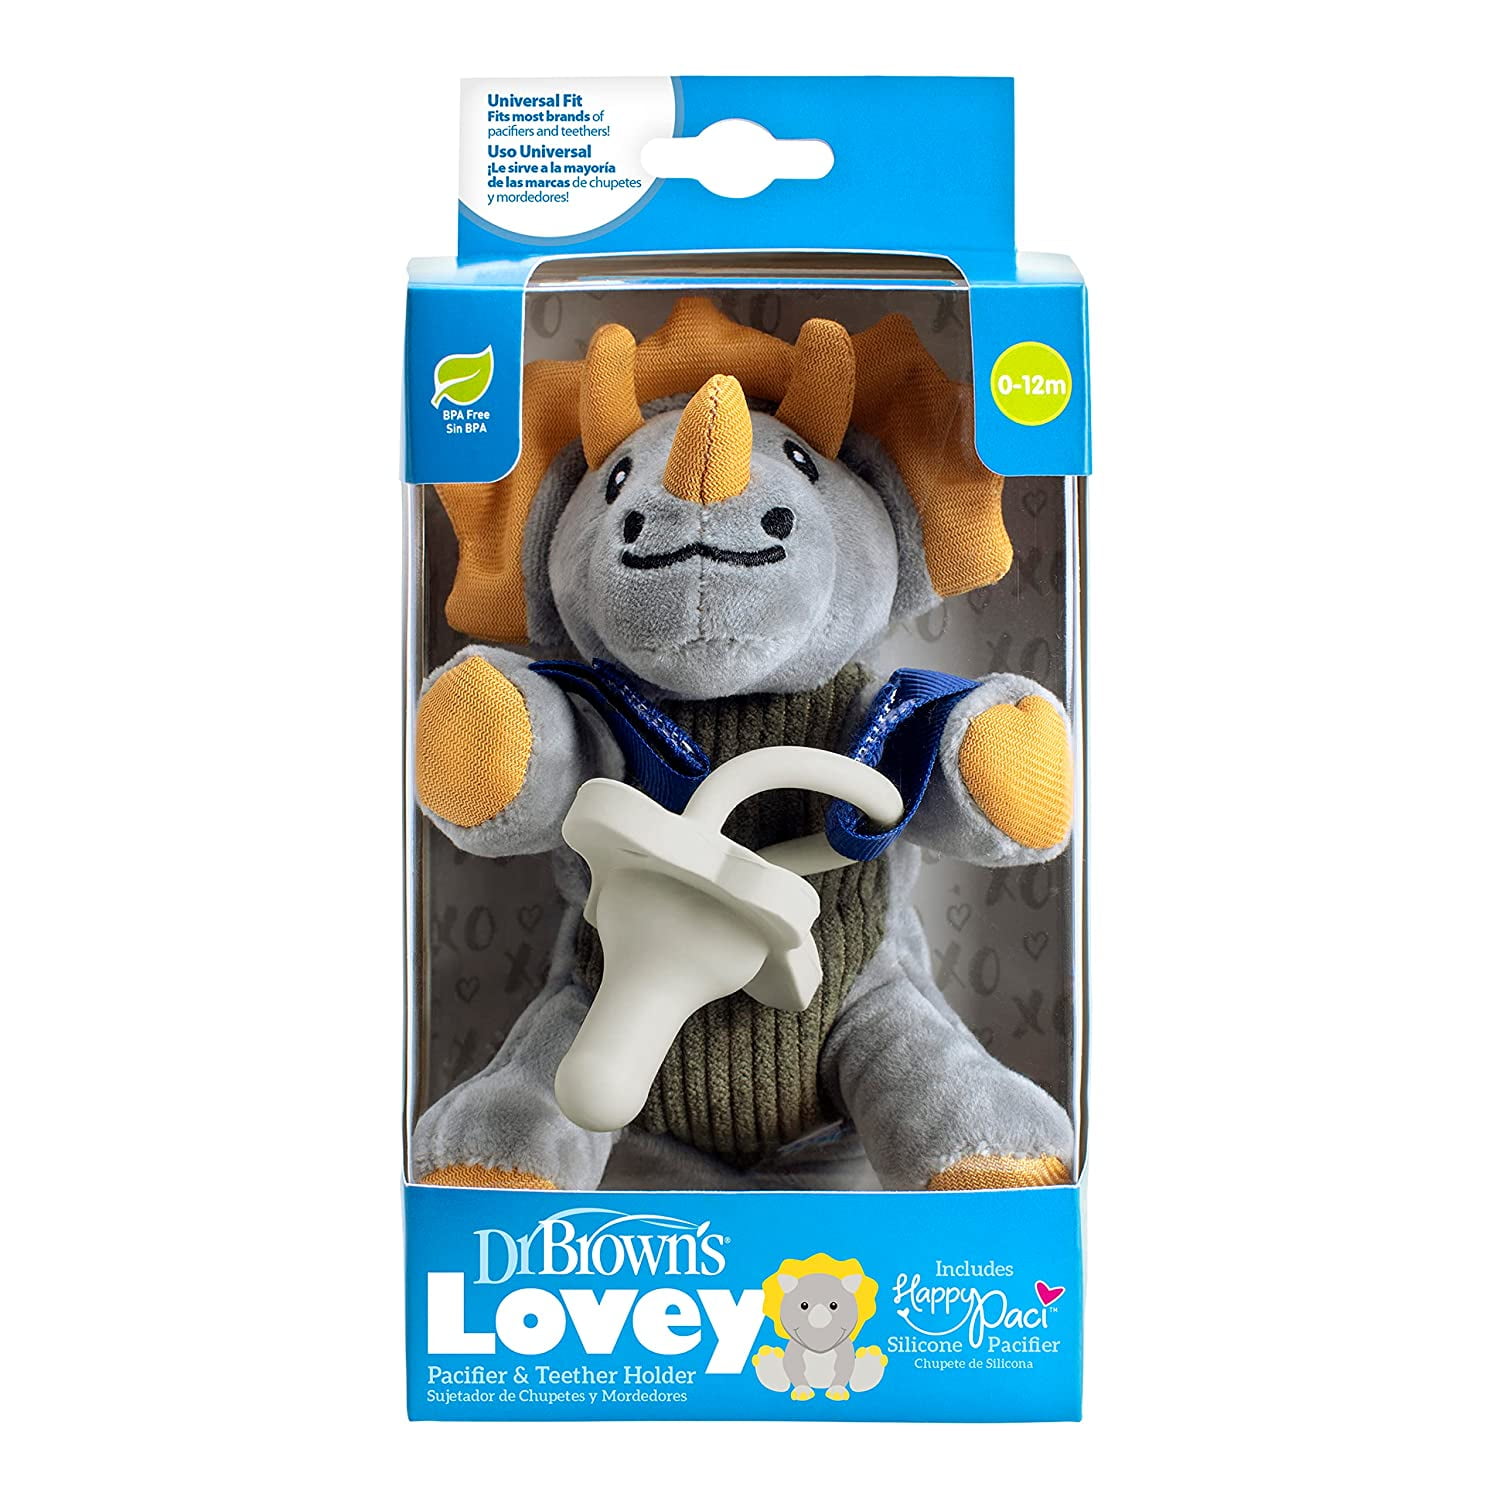 Dr. Brown's Baby Lovey Pacifier & Teether Holder, Triceratops with Grey HappyPaci, 100% Silicone, 0-6m - image 1 of 13